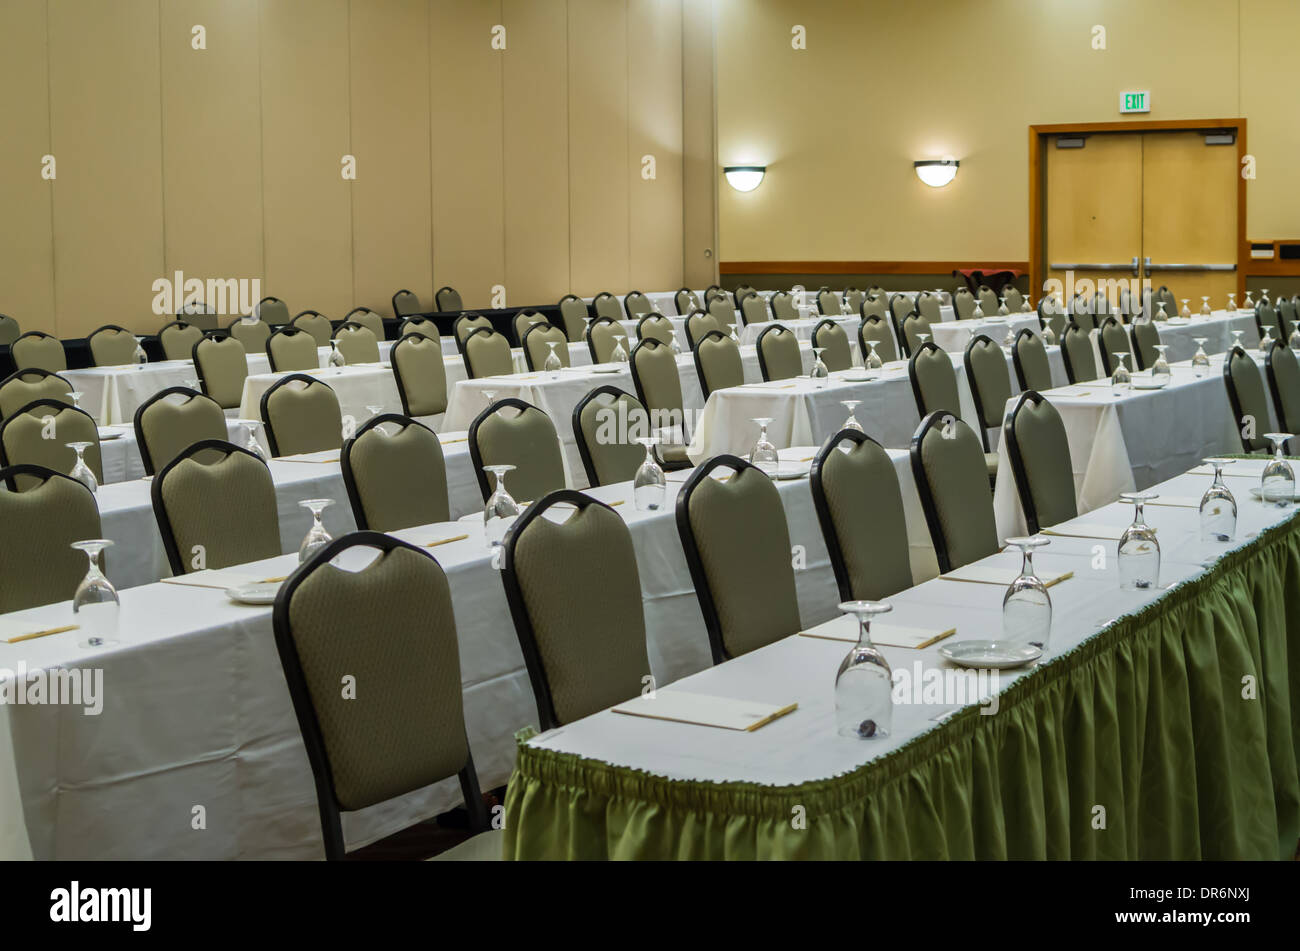 Conference room or meeting room at a conference center ready for attendees Stock Photo